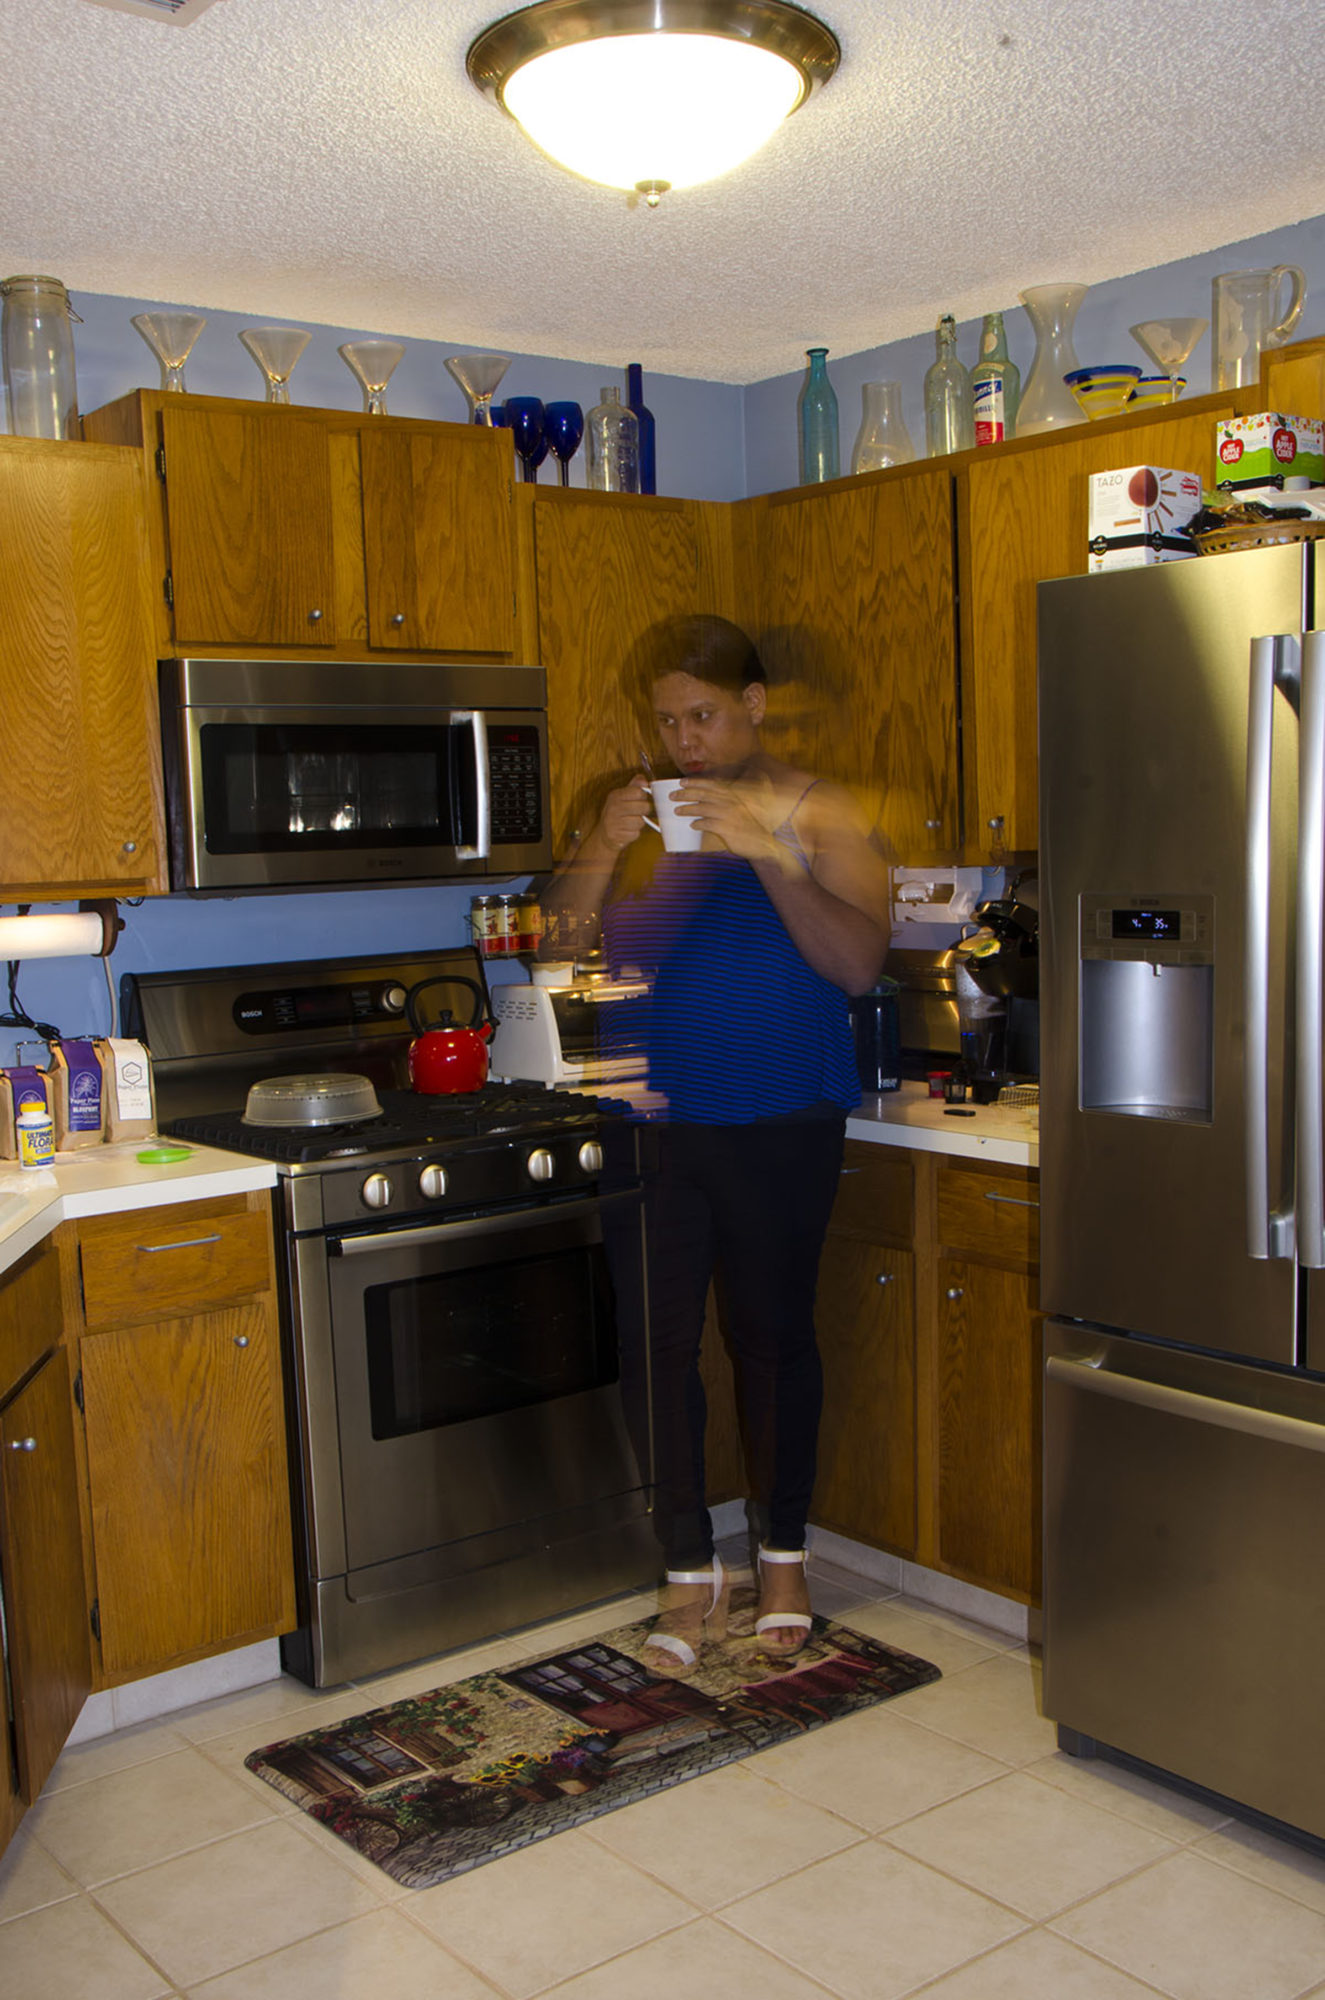 A blurred woman drinks coffee in a kitchen